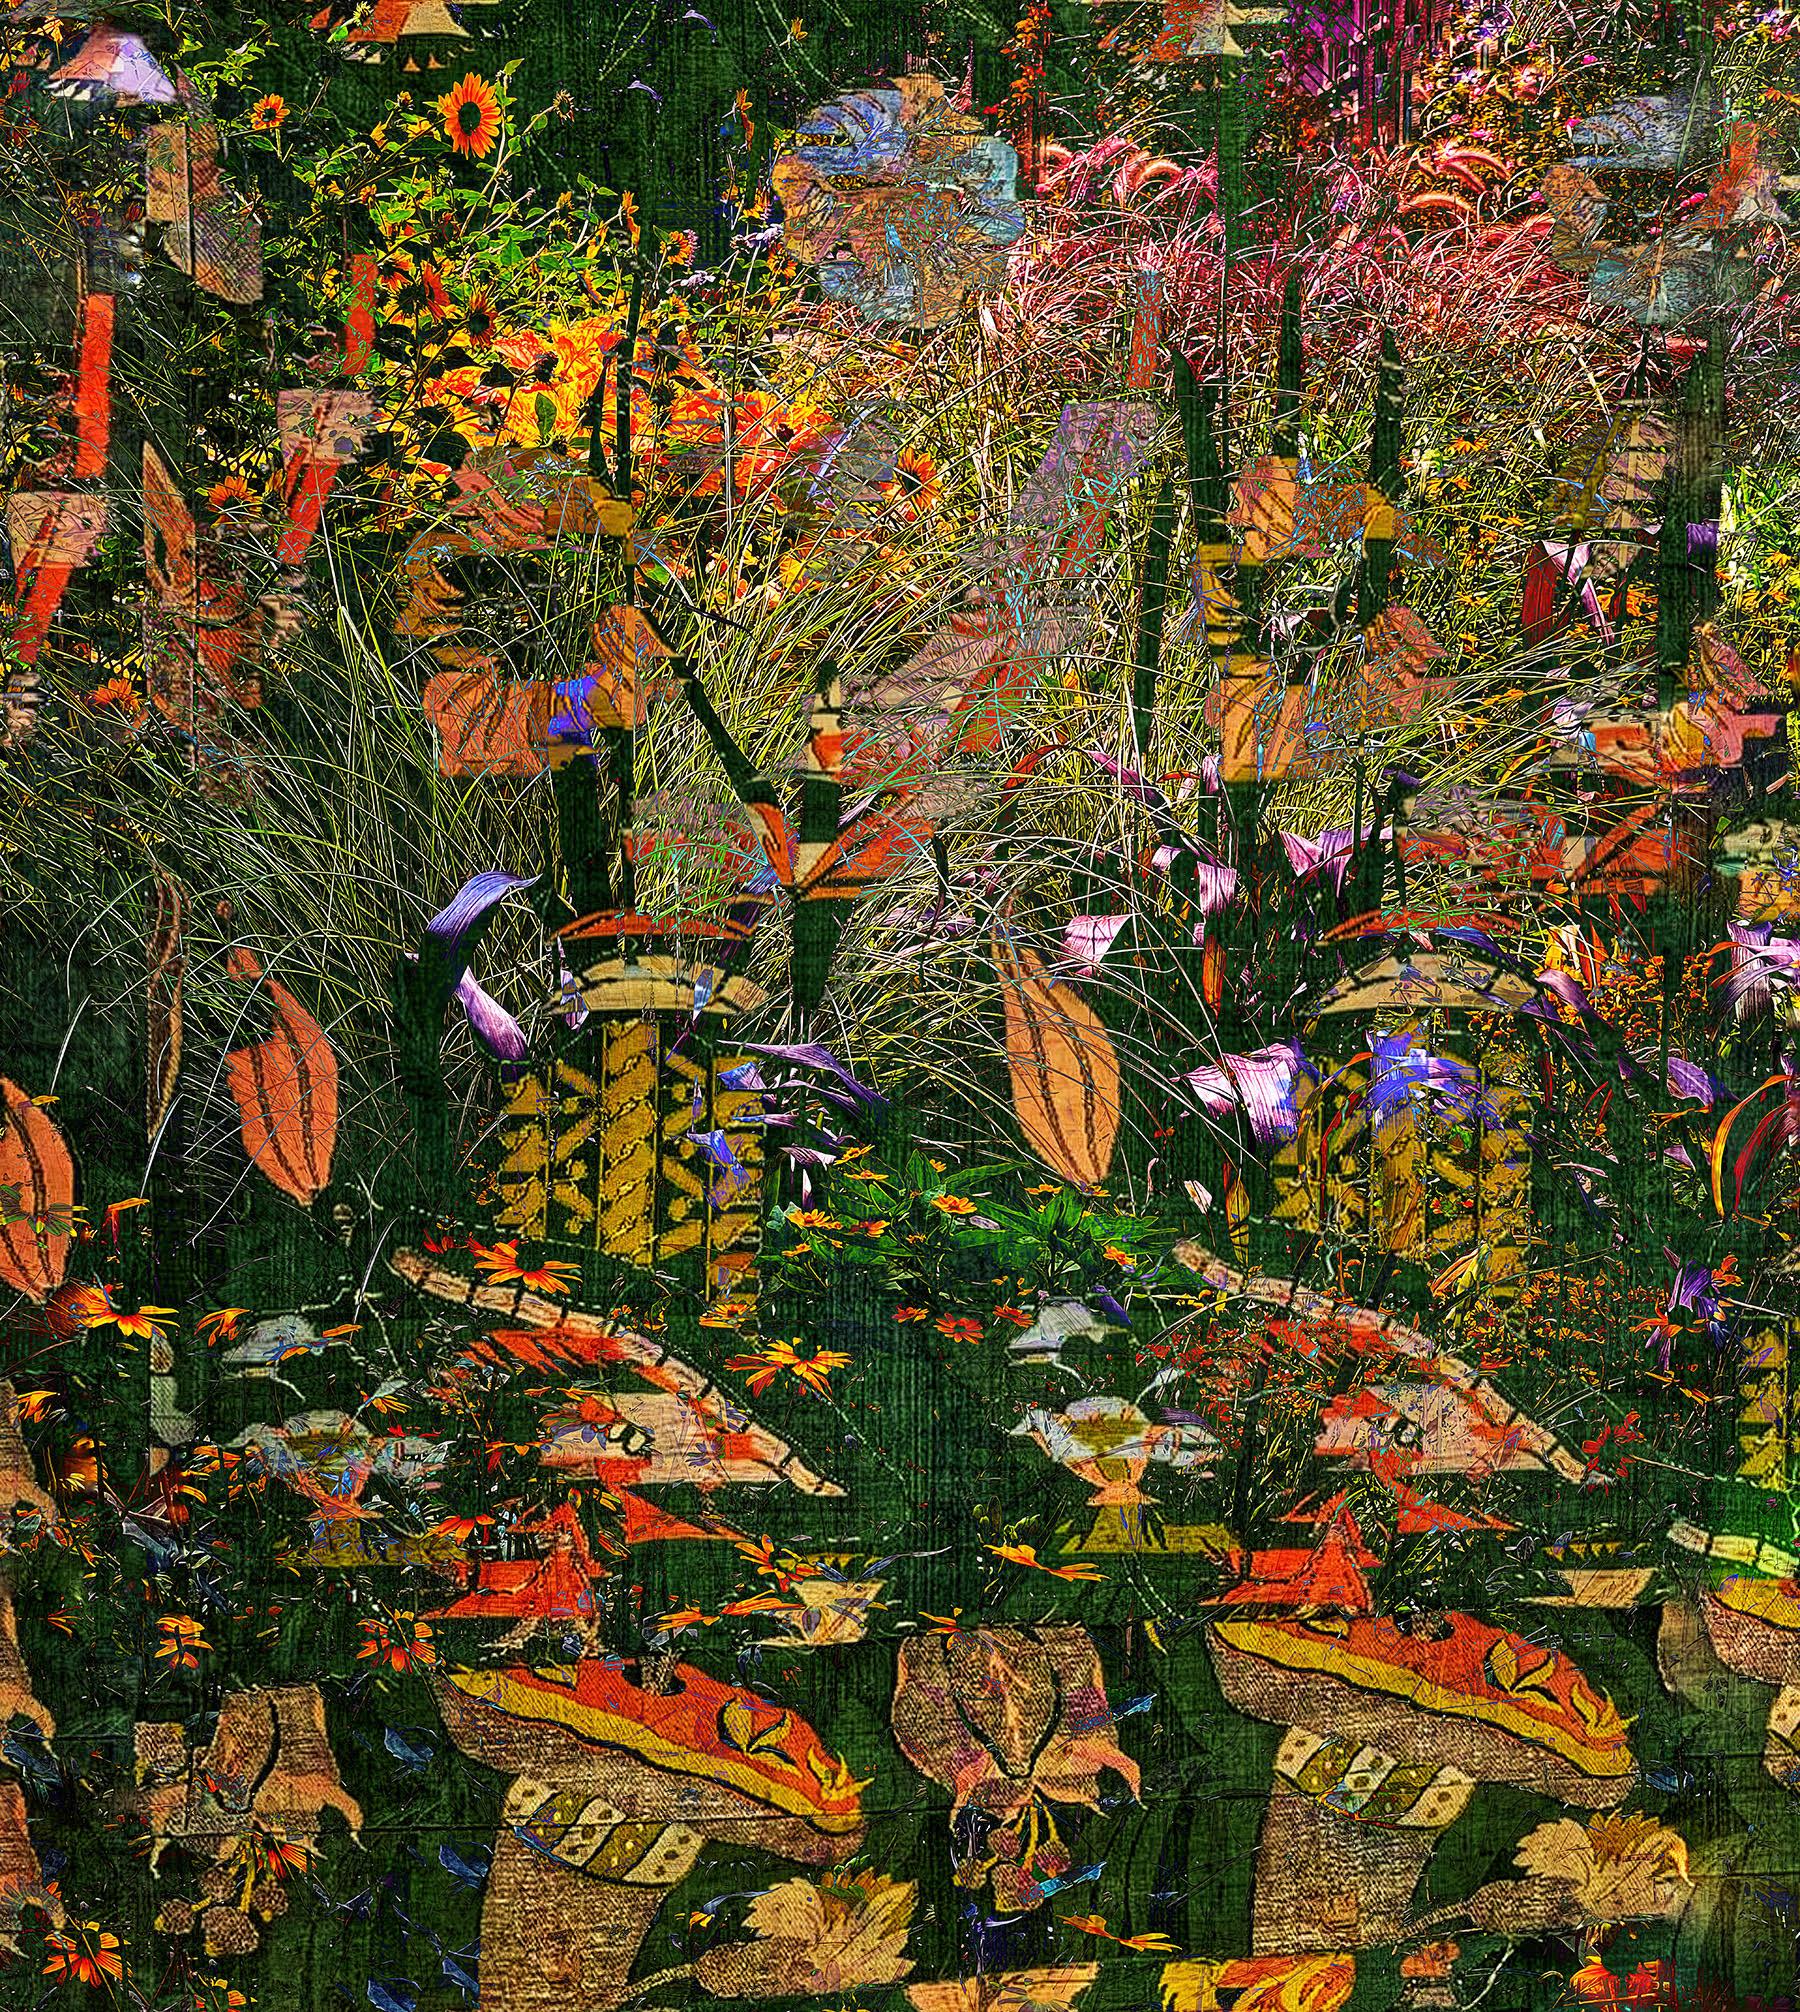 'Eden' 2022 by Carol Bouyoucos. Archival print, Digital photomontage, Ed. of 10, Image: 37.5 x 33.25 in.  Paper: 40 x 36 in.  Frame: 41.25 x 37 in. This manipulated photomontage features a closeup view of a forest with a variety of flowers and